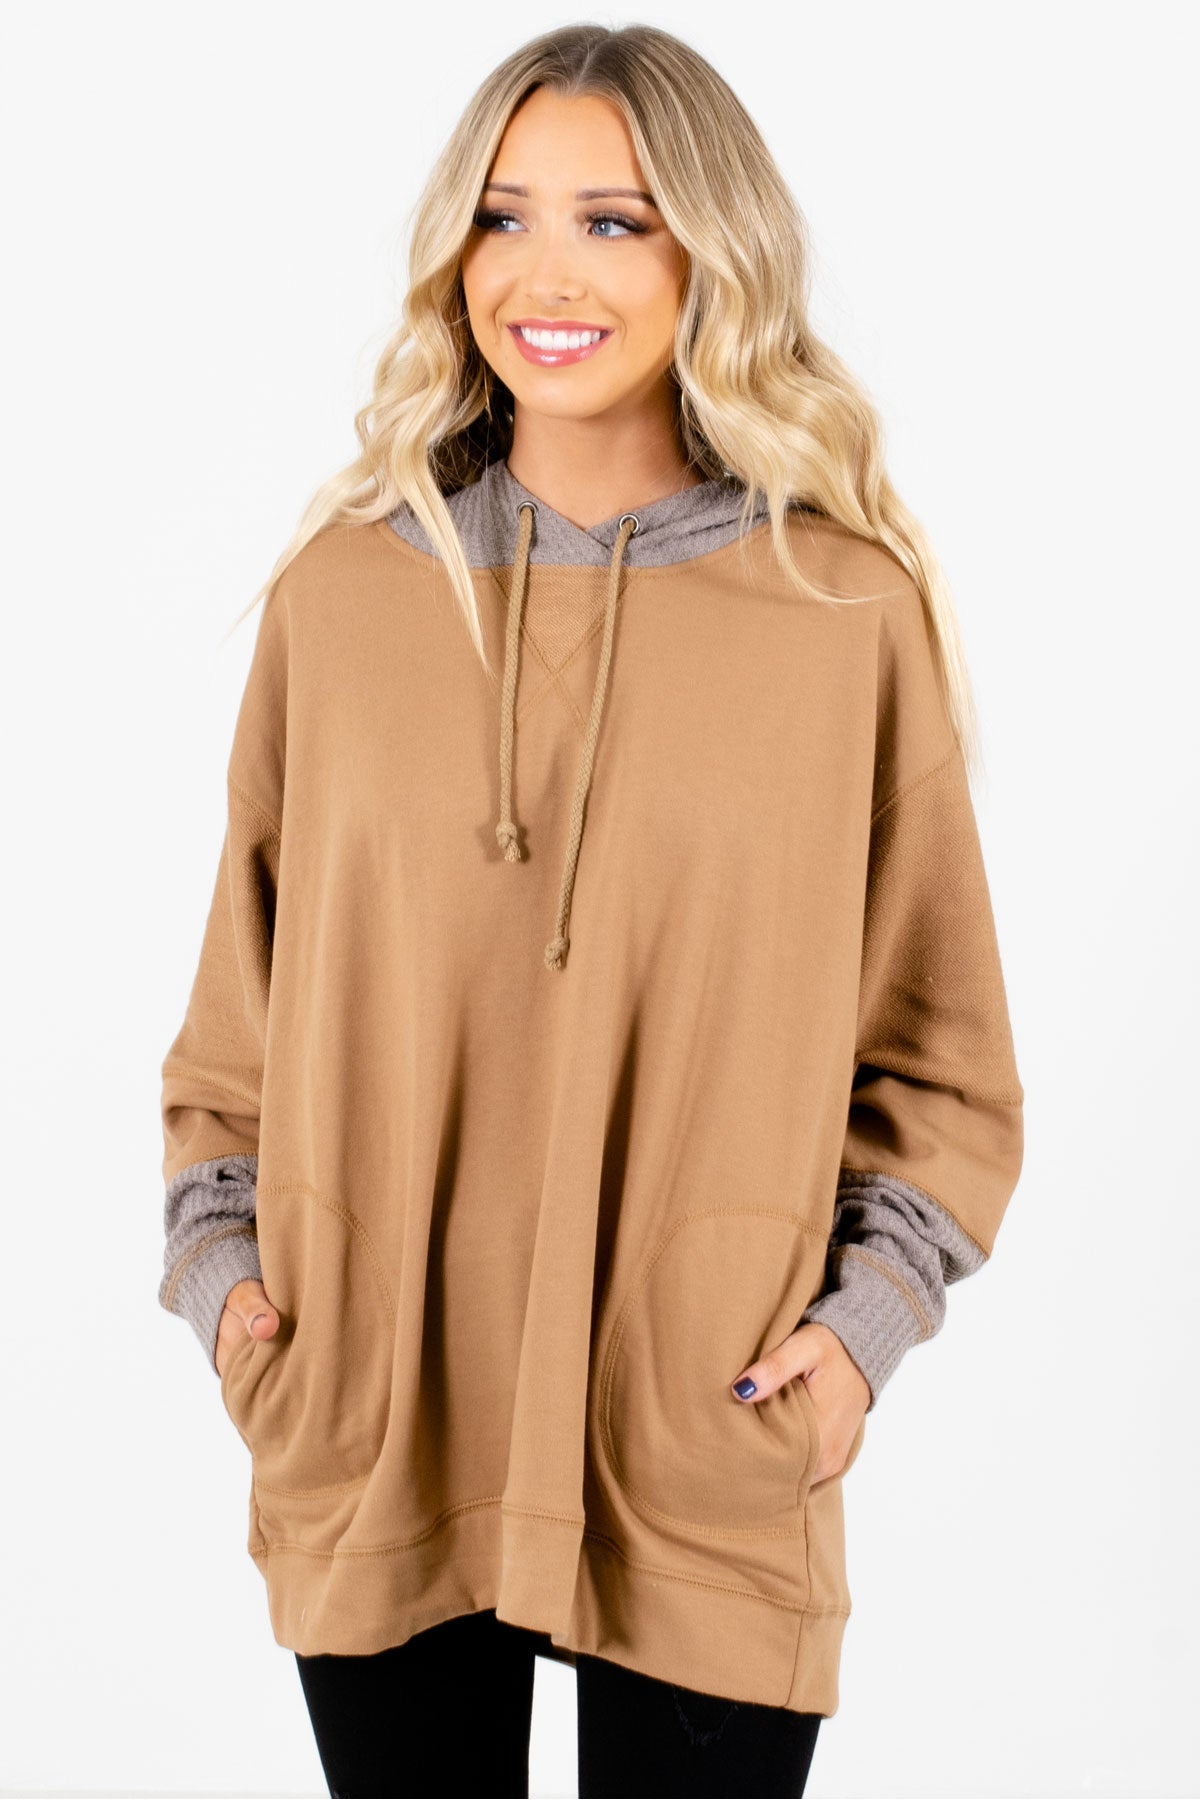 Women's Muted Orange Warm and Cozy Boutique Hoodie